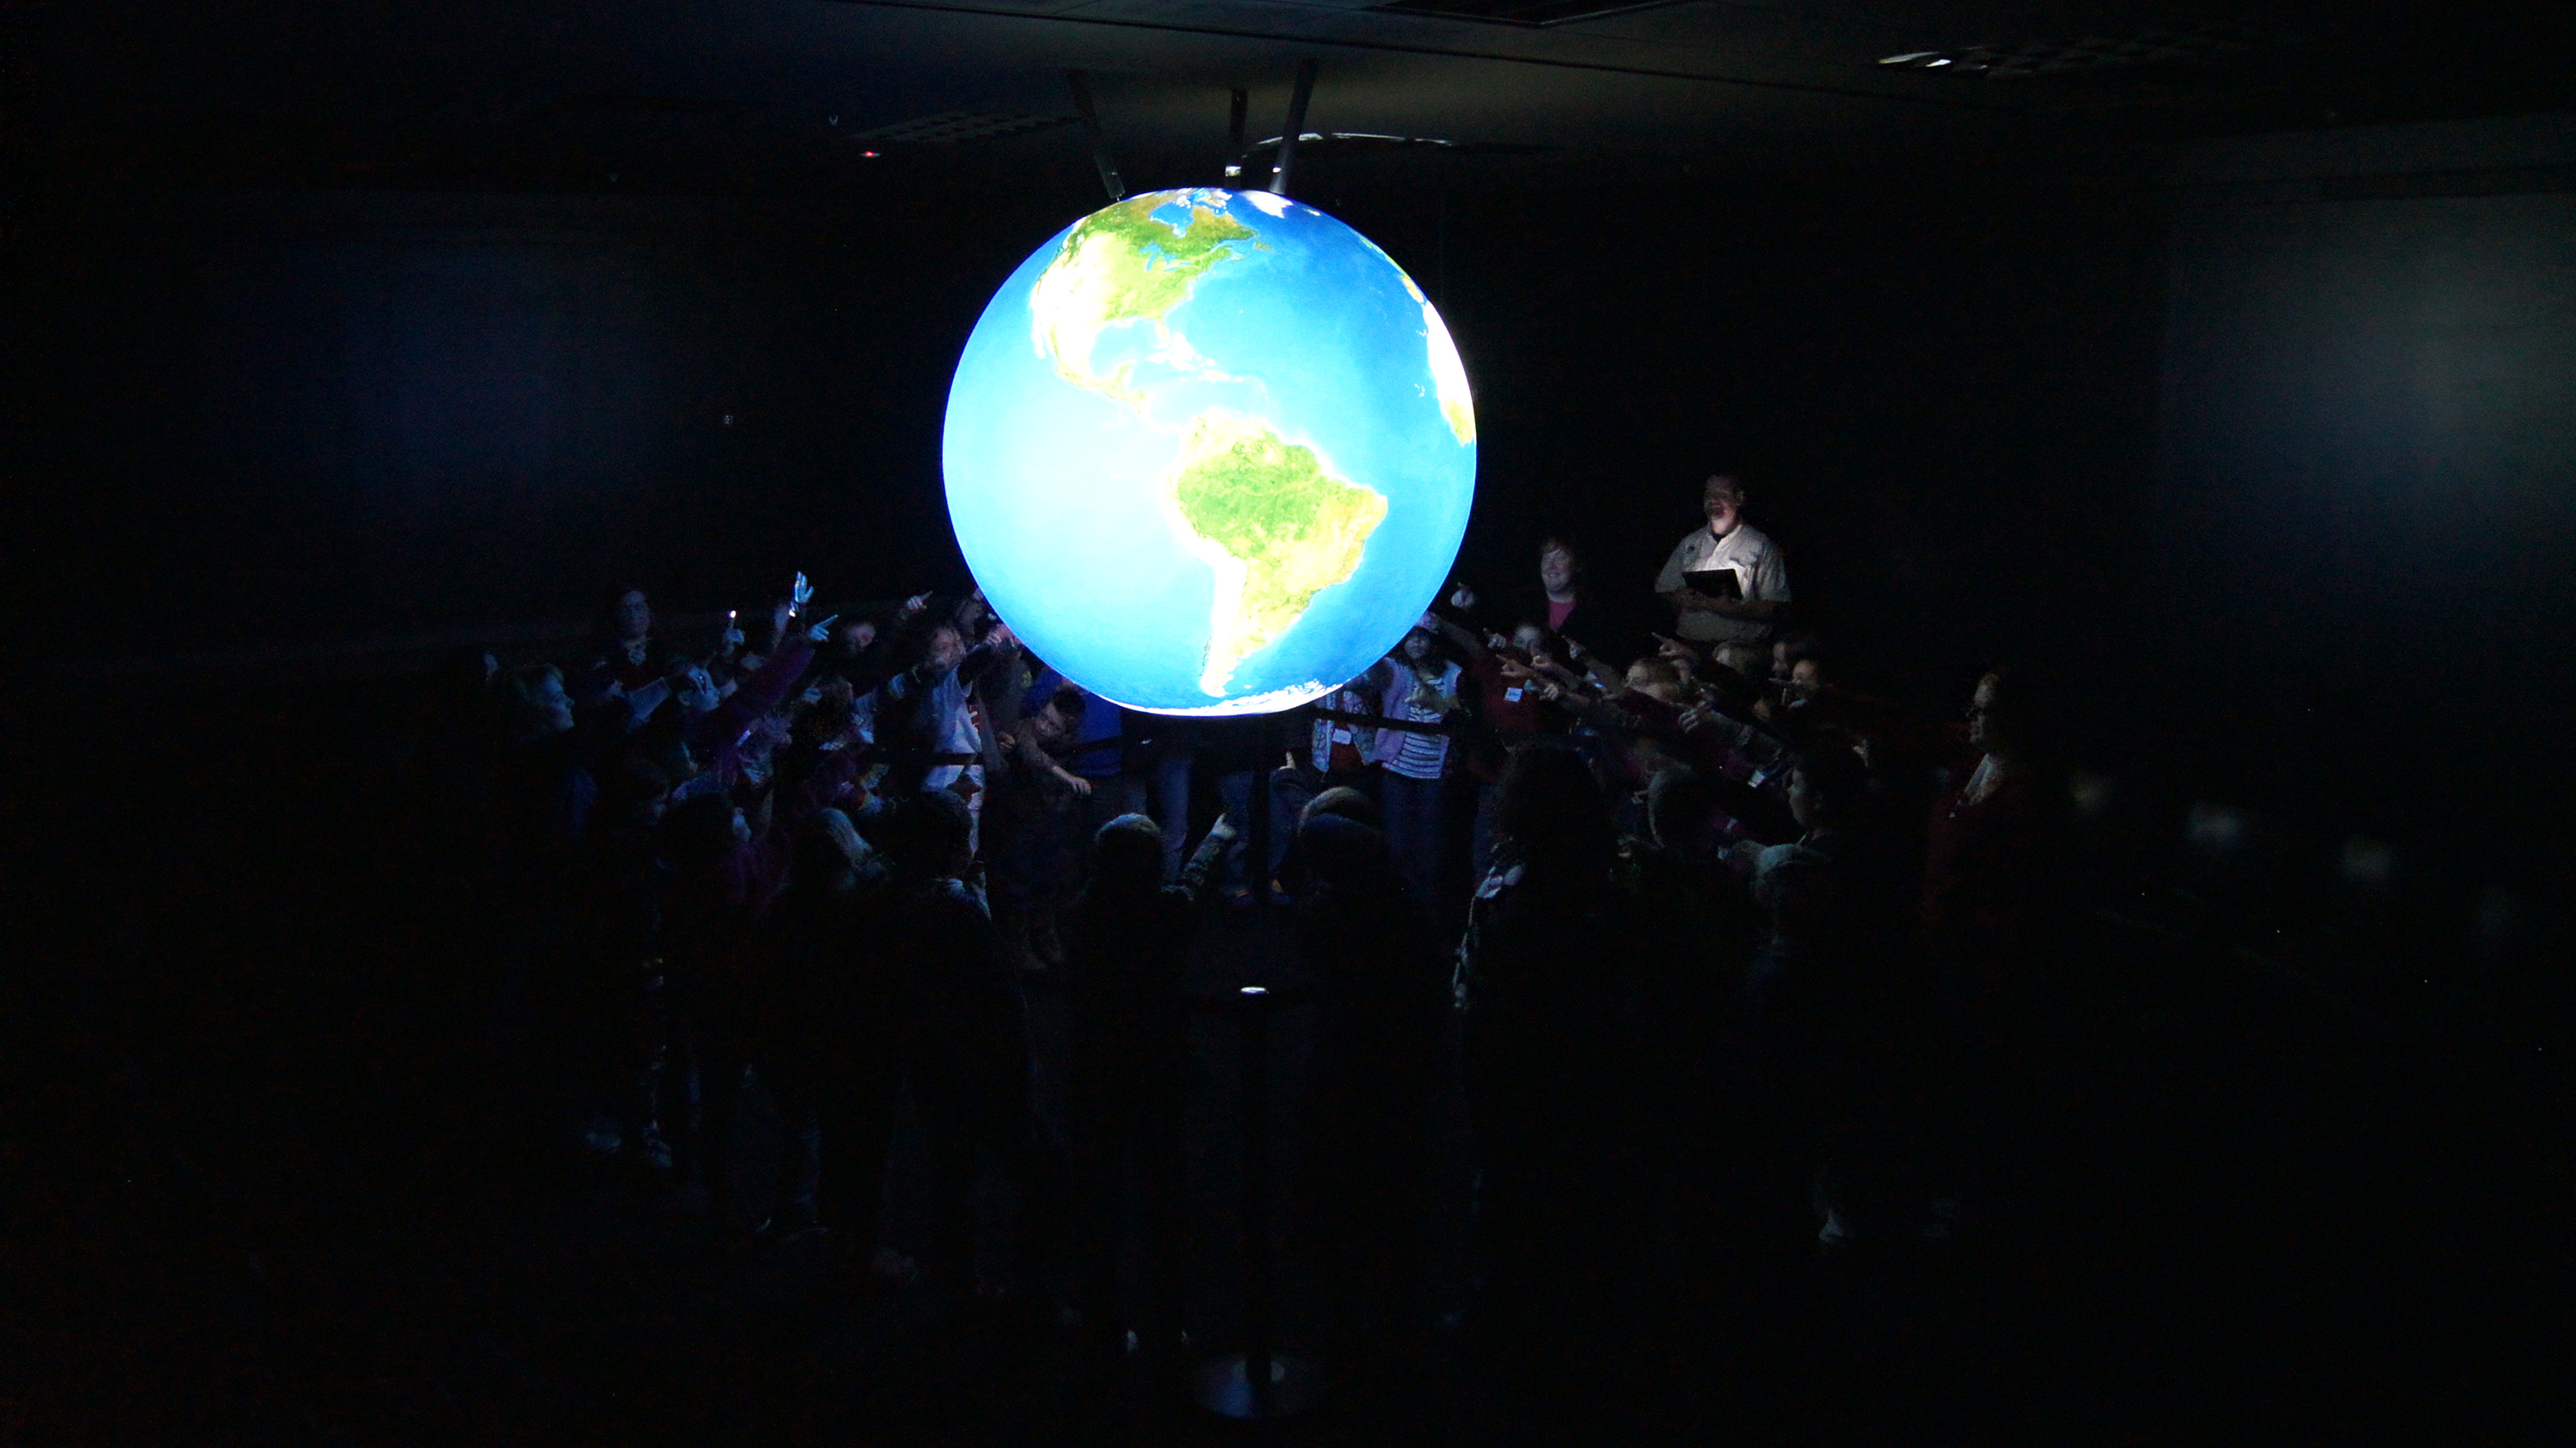 A group of school children stand around Science On a Sphere, pointing at it. They are illuminated only by the light reflected from the Sphere